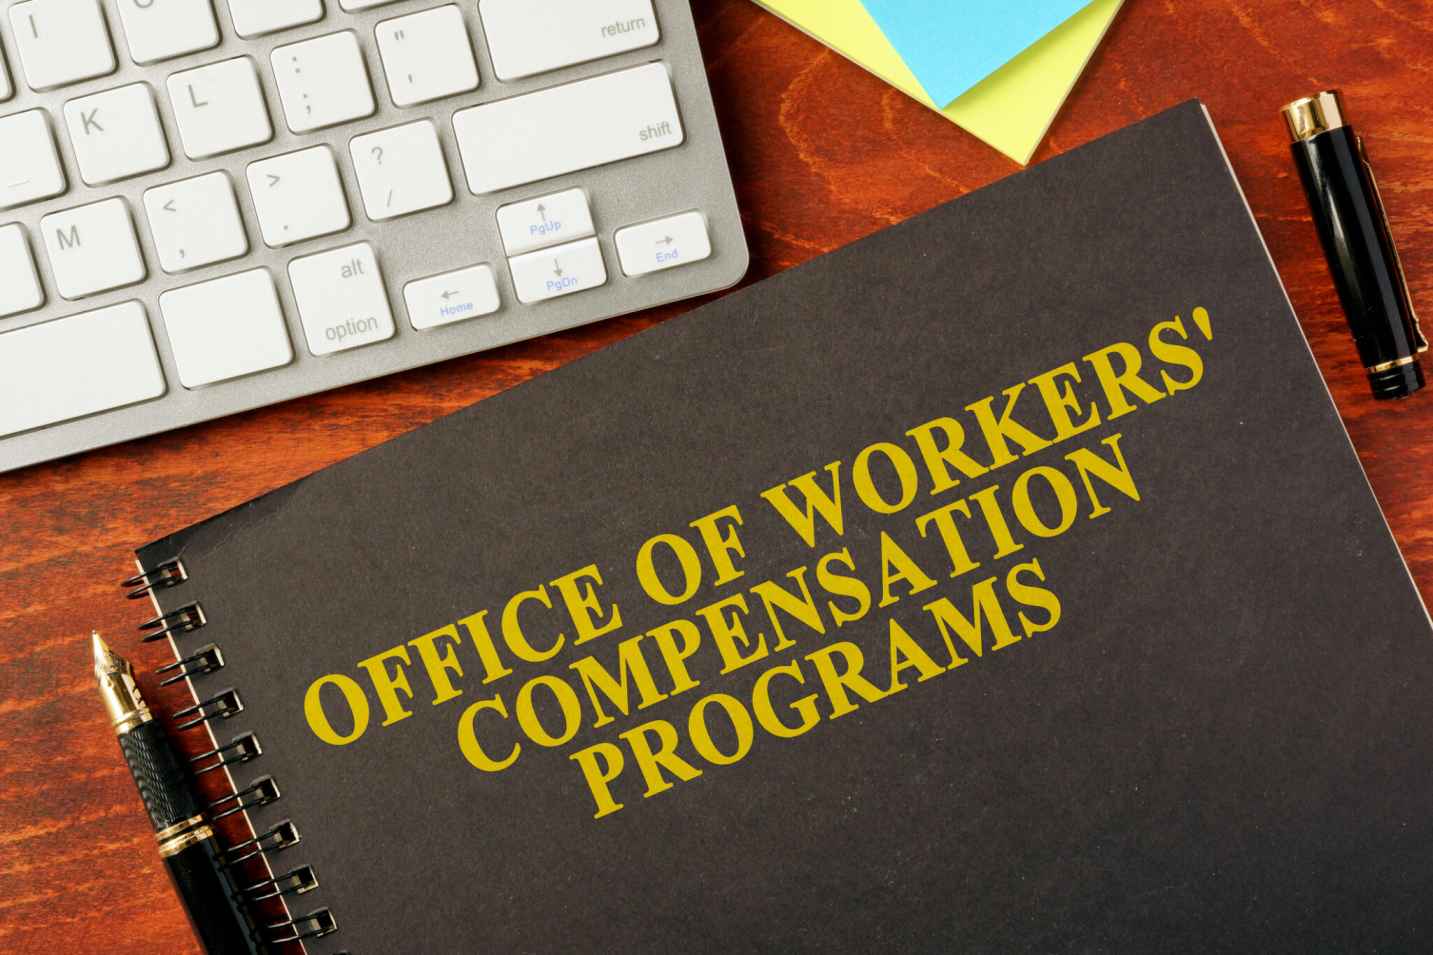 Office of workers compensation programs in Maryland